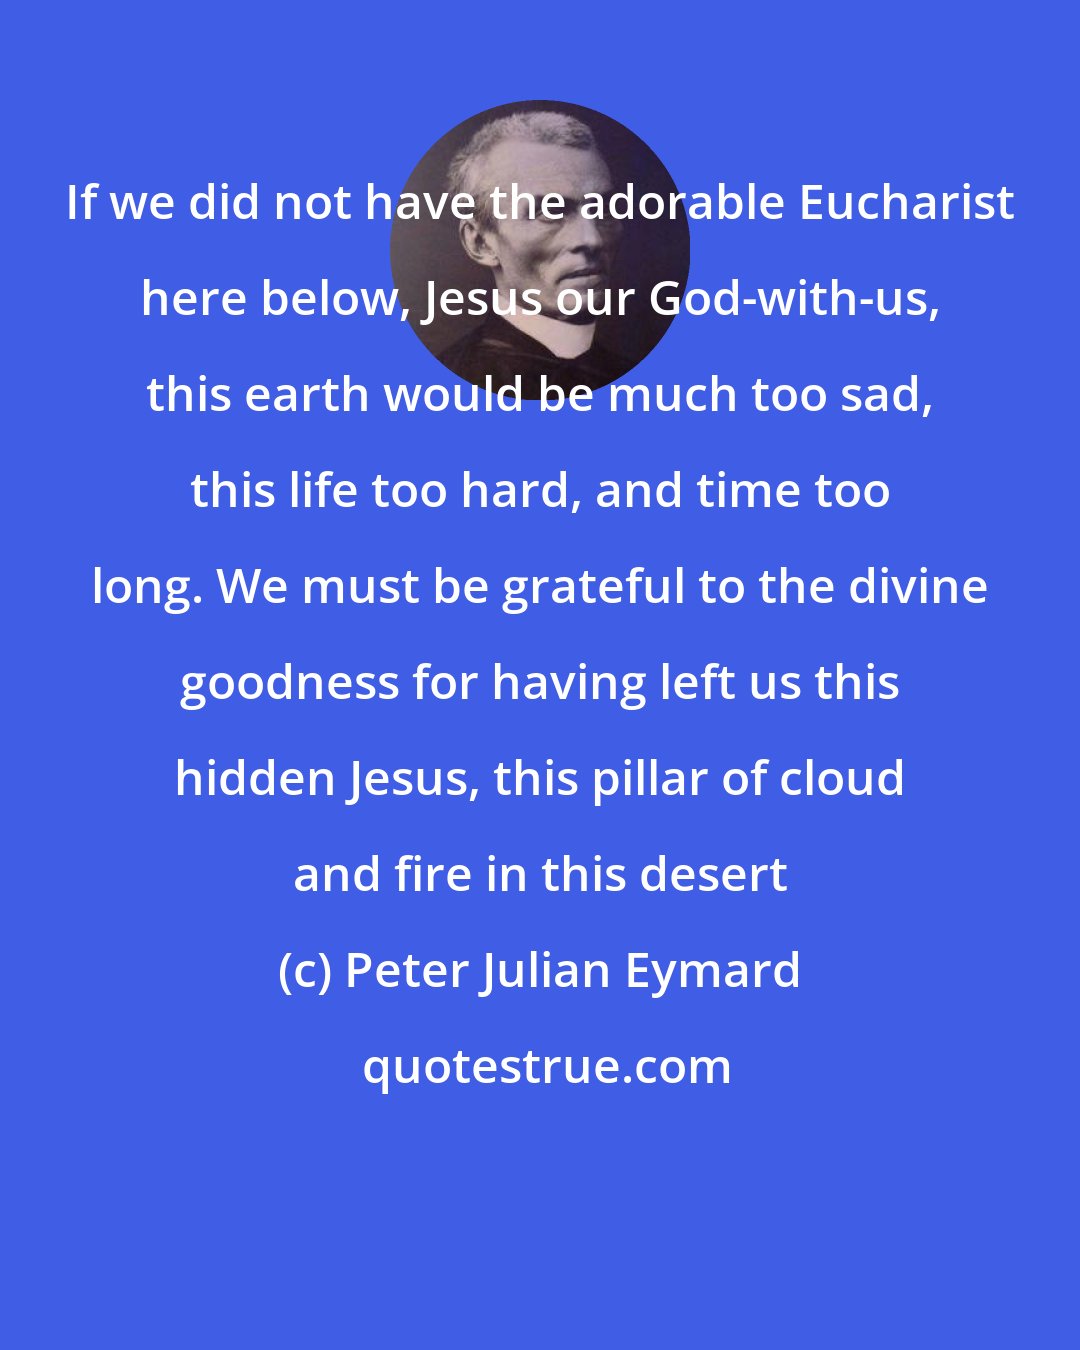 Peter Julian Eymard: If we did not have the adorable Eucharist here below, Jesus our God-with-us, this earth would be much too sad, this life too hard, and time too long. We must be grateful to the divine goodness for having left us this hidden Jesus, this pillar of cloud and fire in this desert